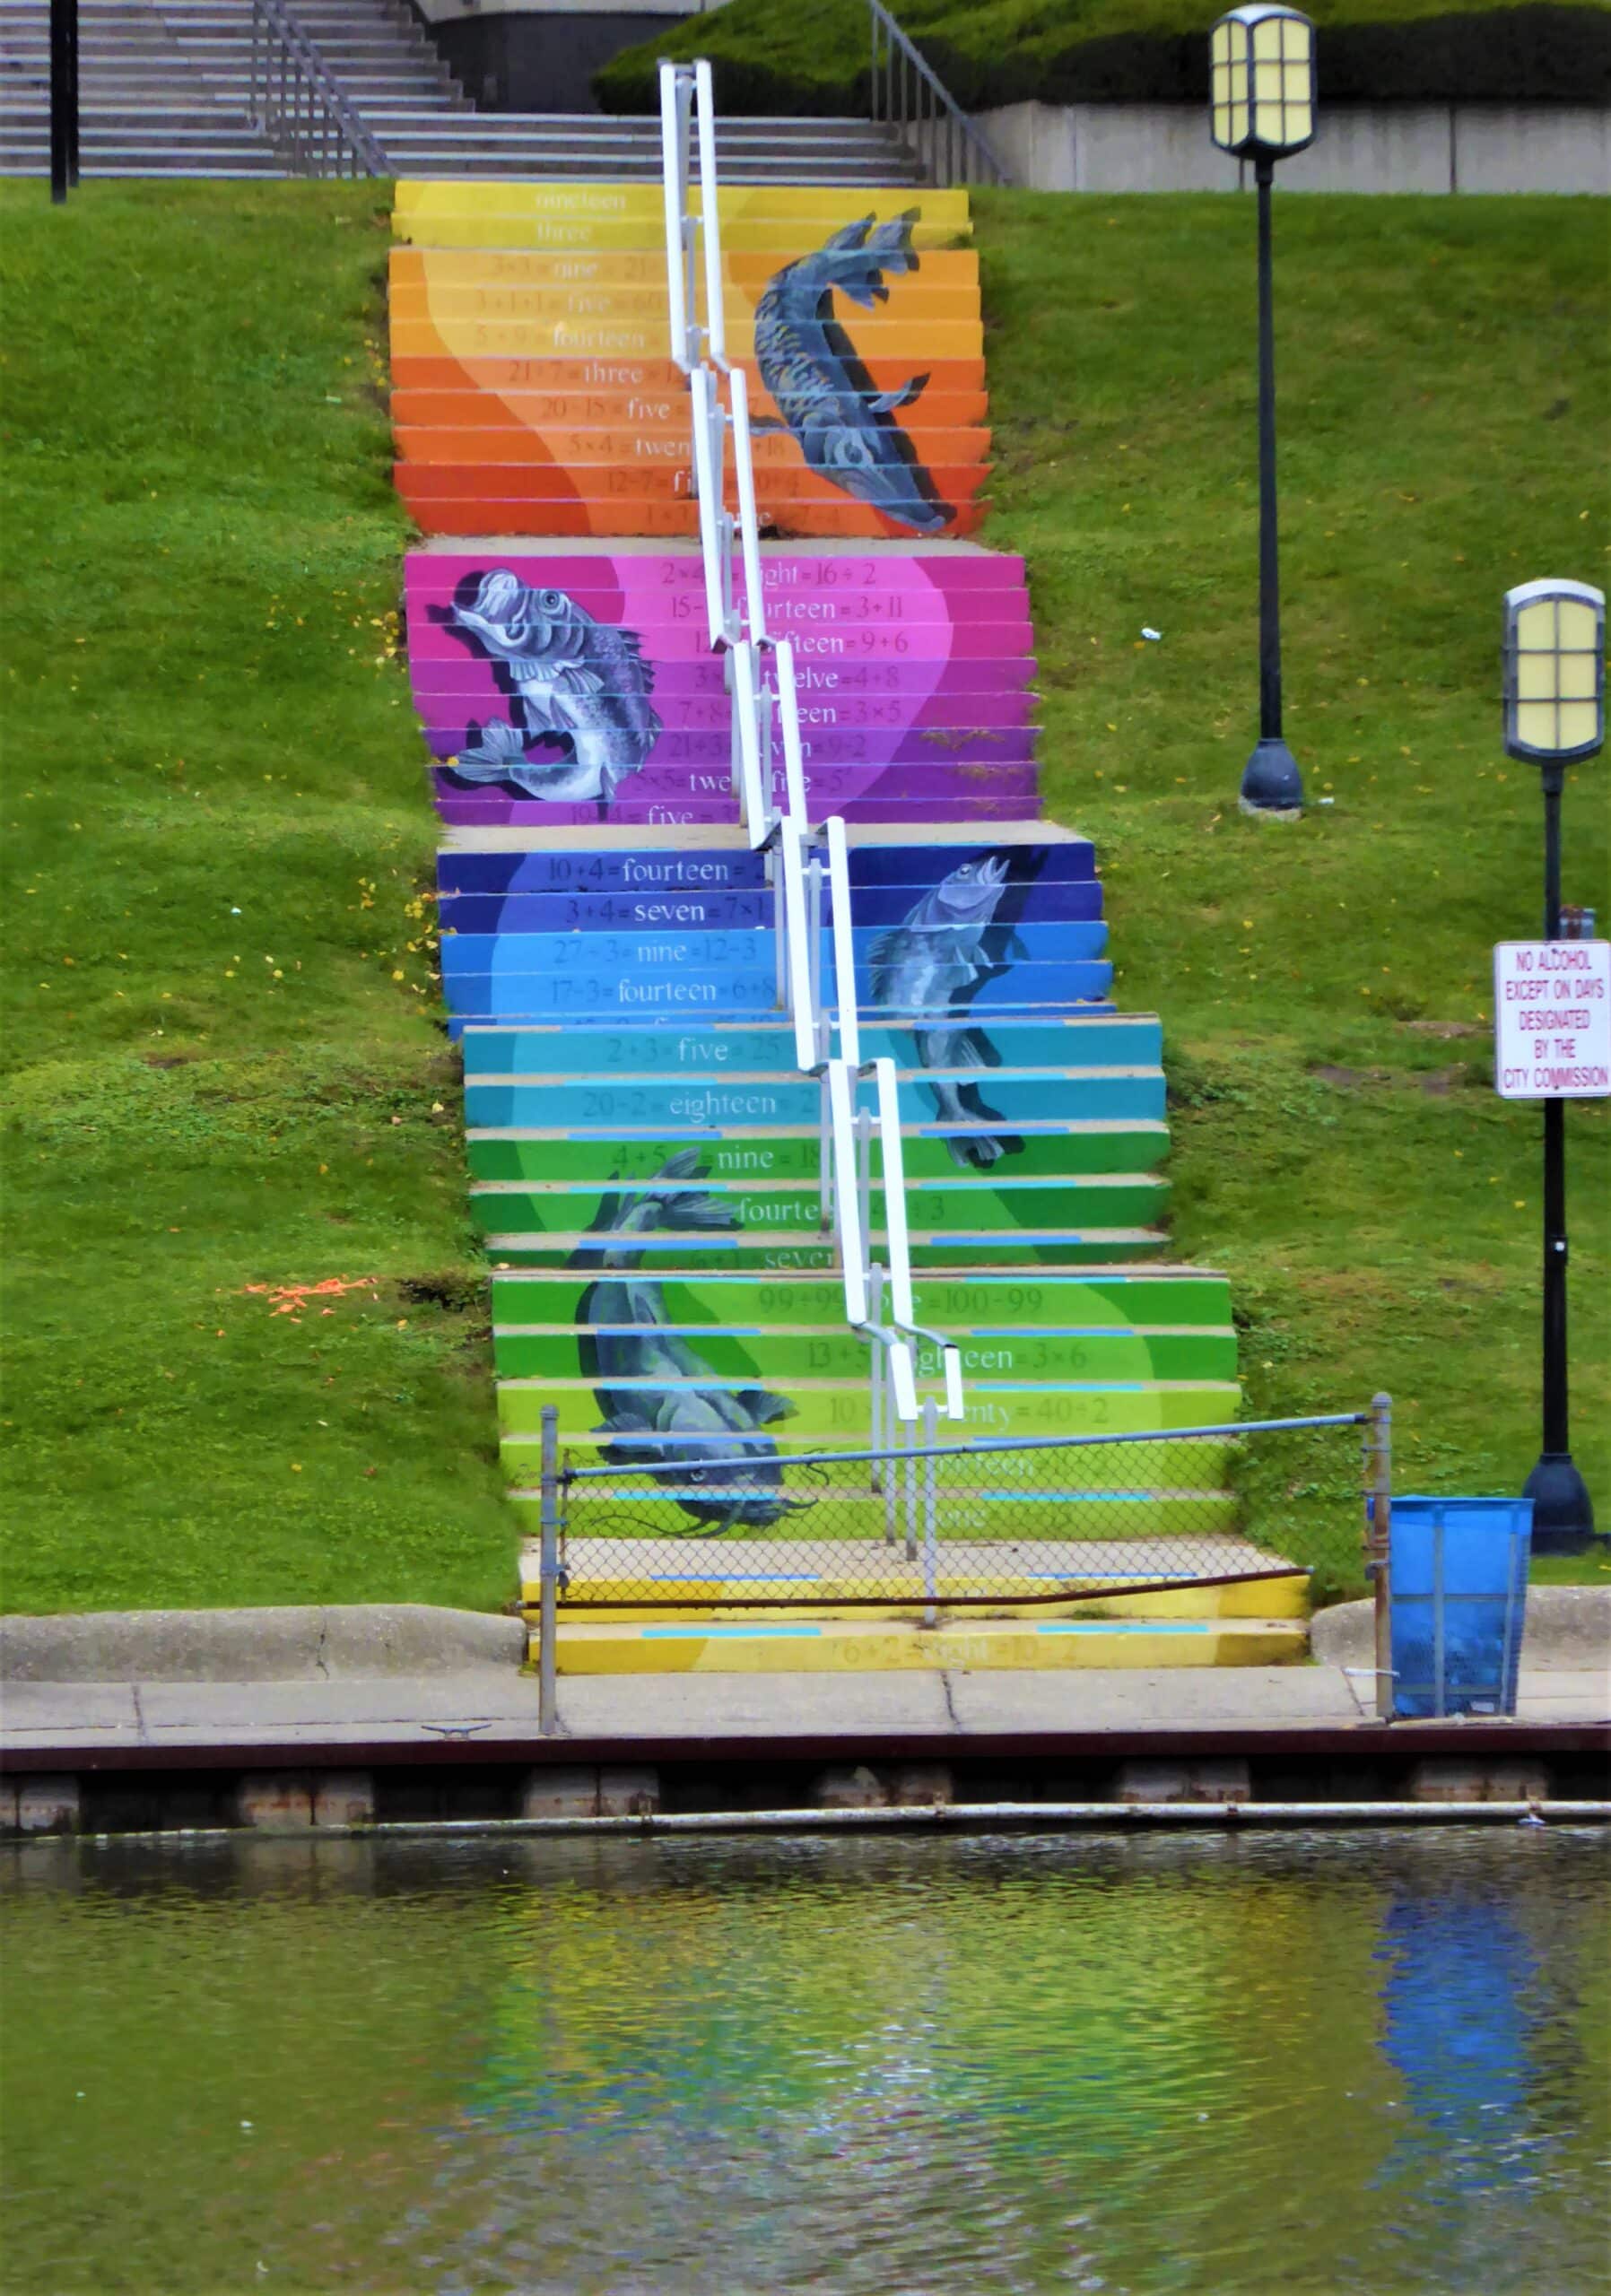 A photo of a mural on stairs that is a rainbow with a few fish jumping painted on top